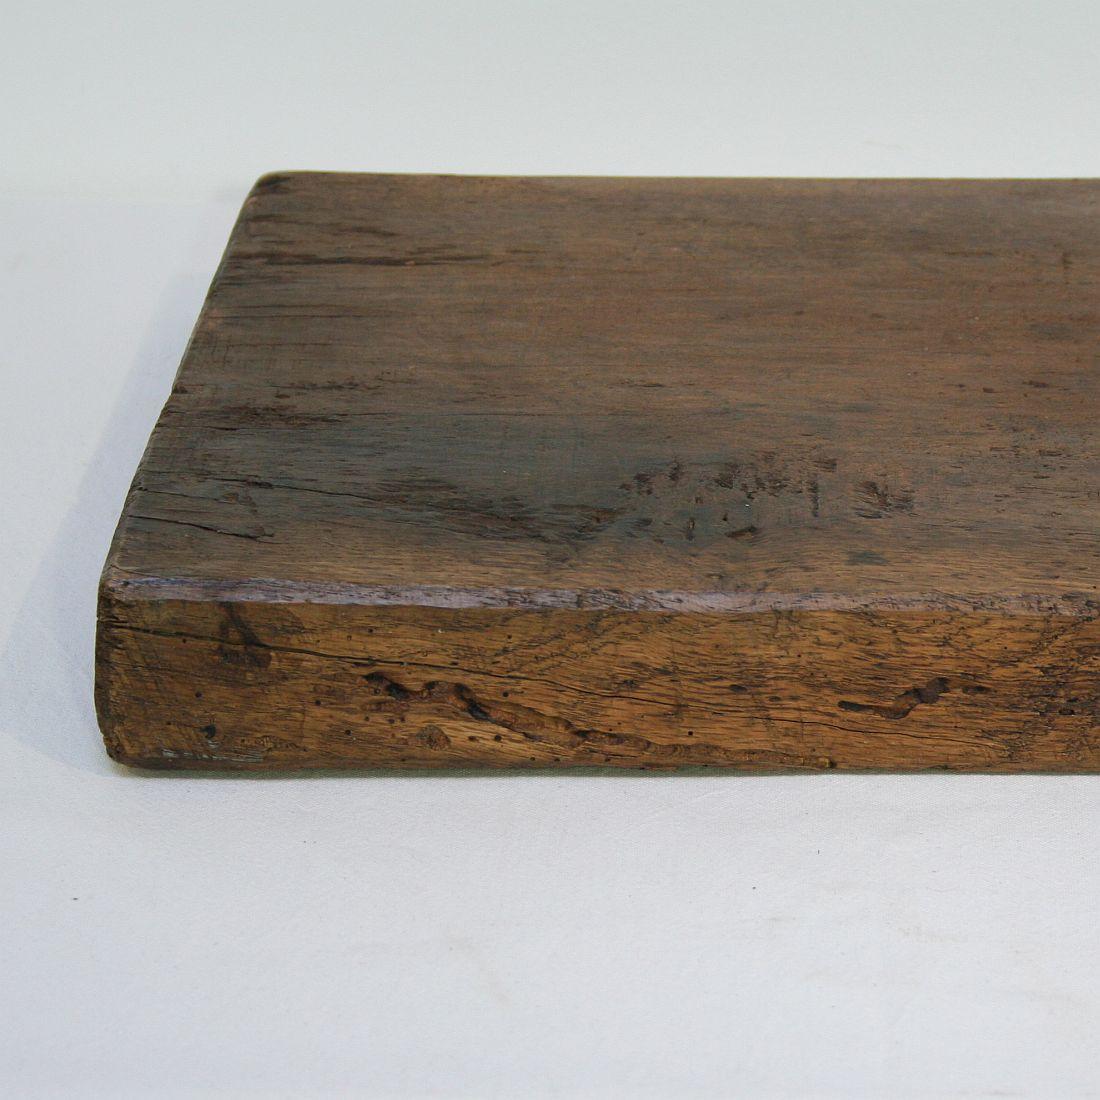 French, 19th Century, Wooden Chopping or Cutting Board 3